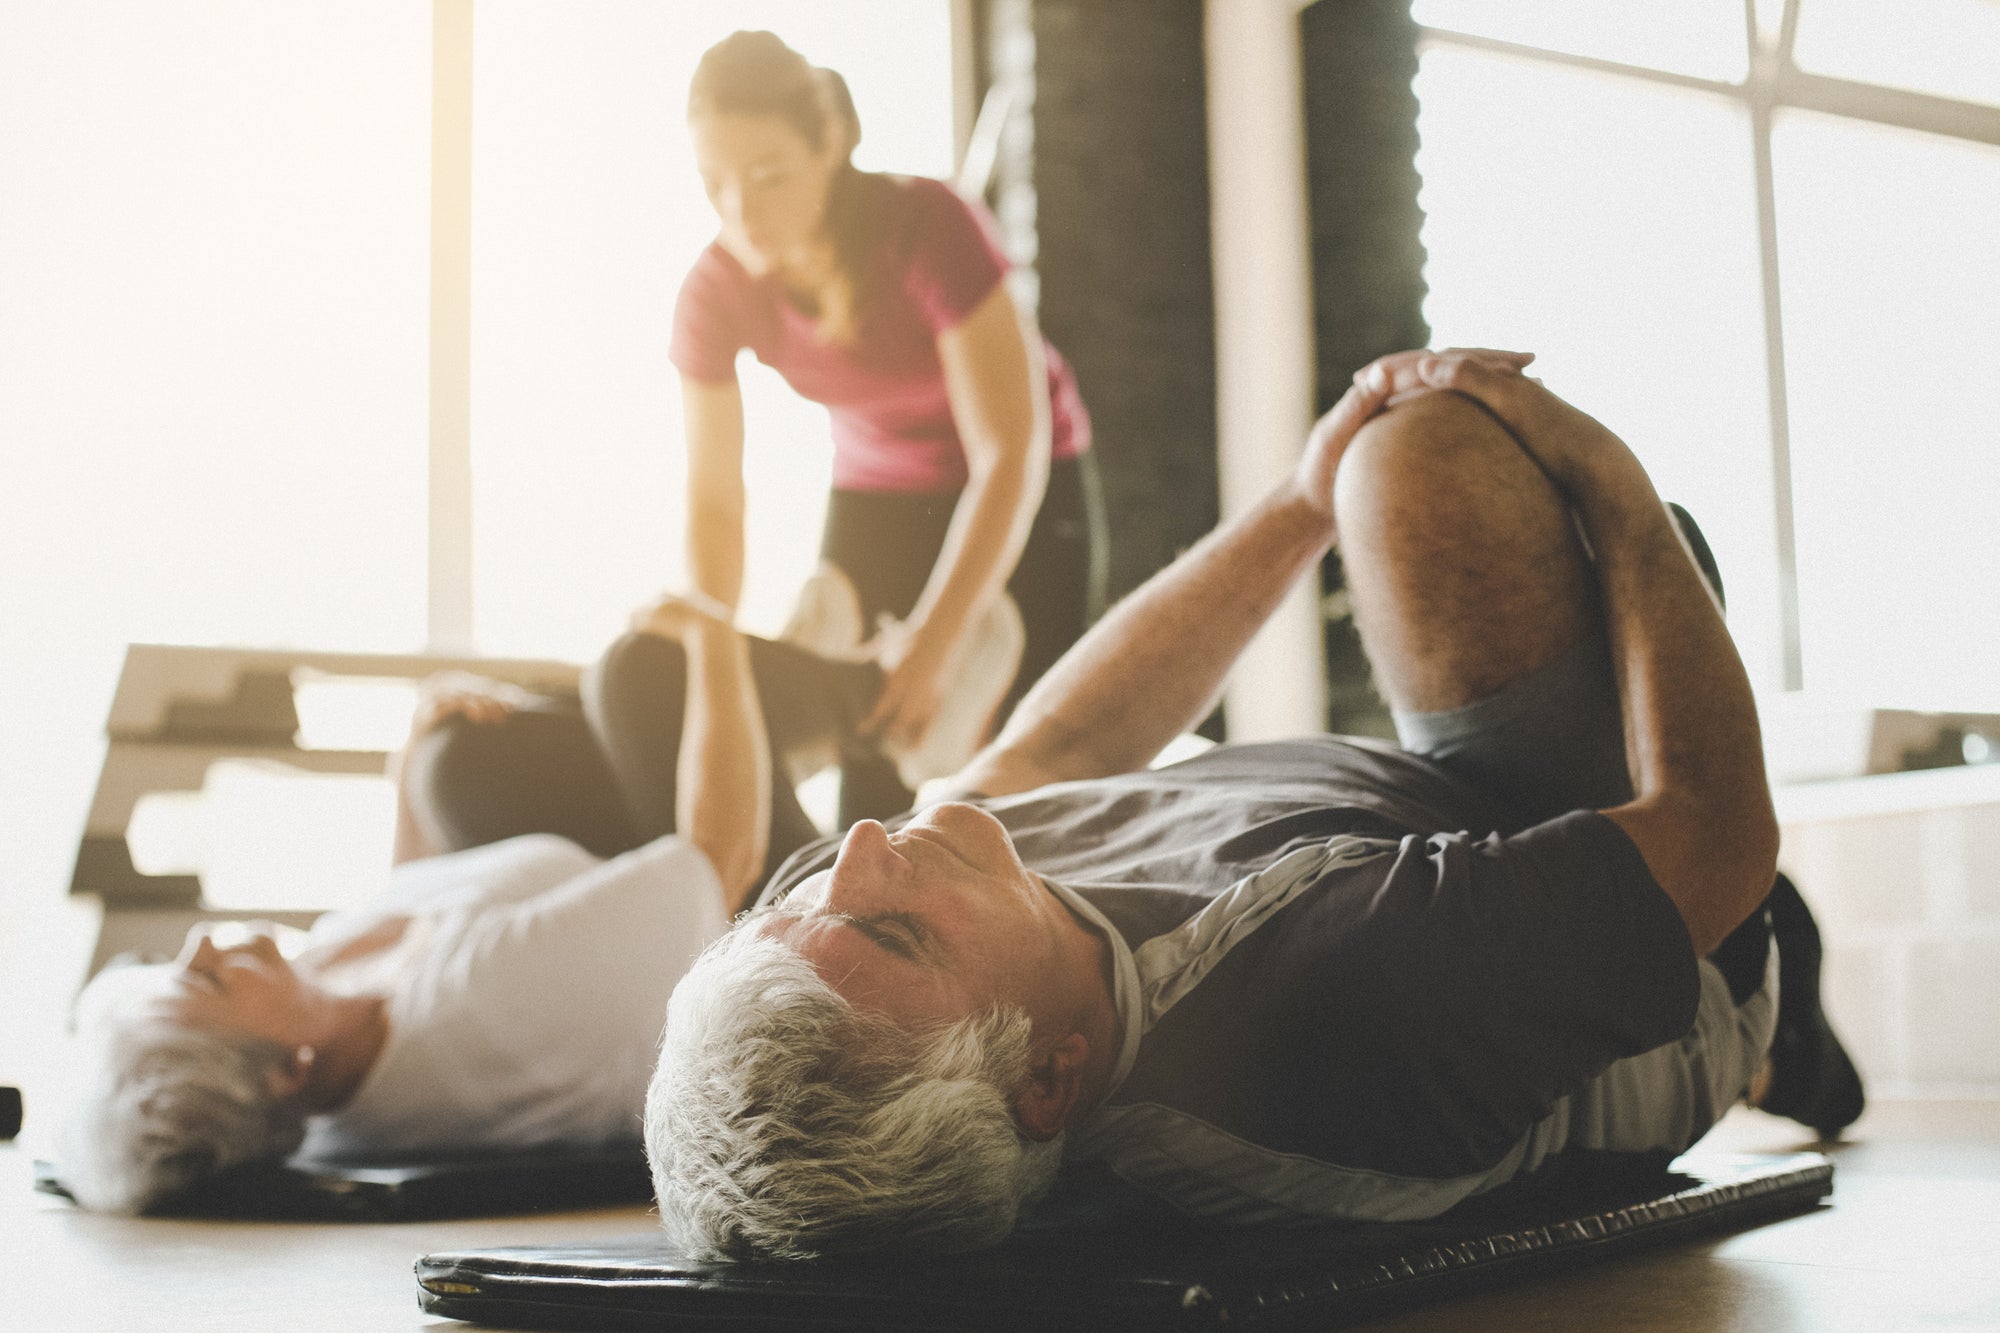 Get Up, Stand Up: Movement Based Training for Seniors